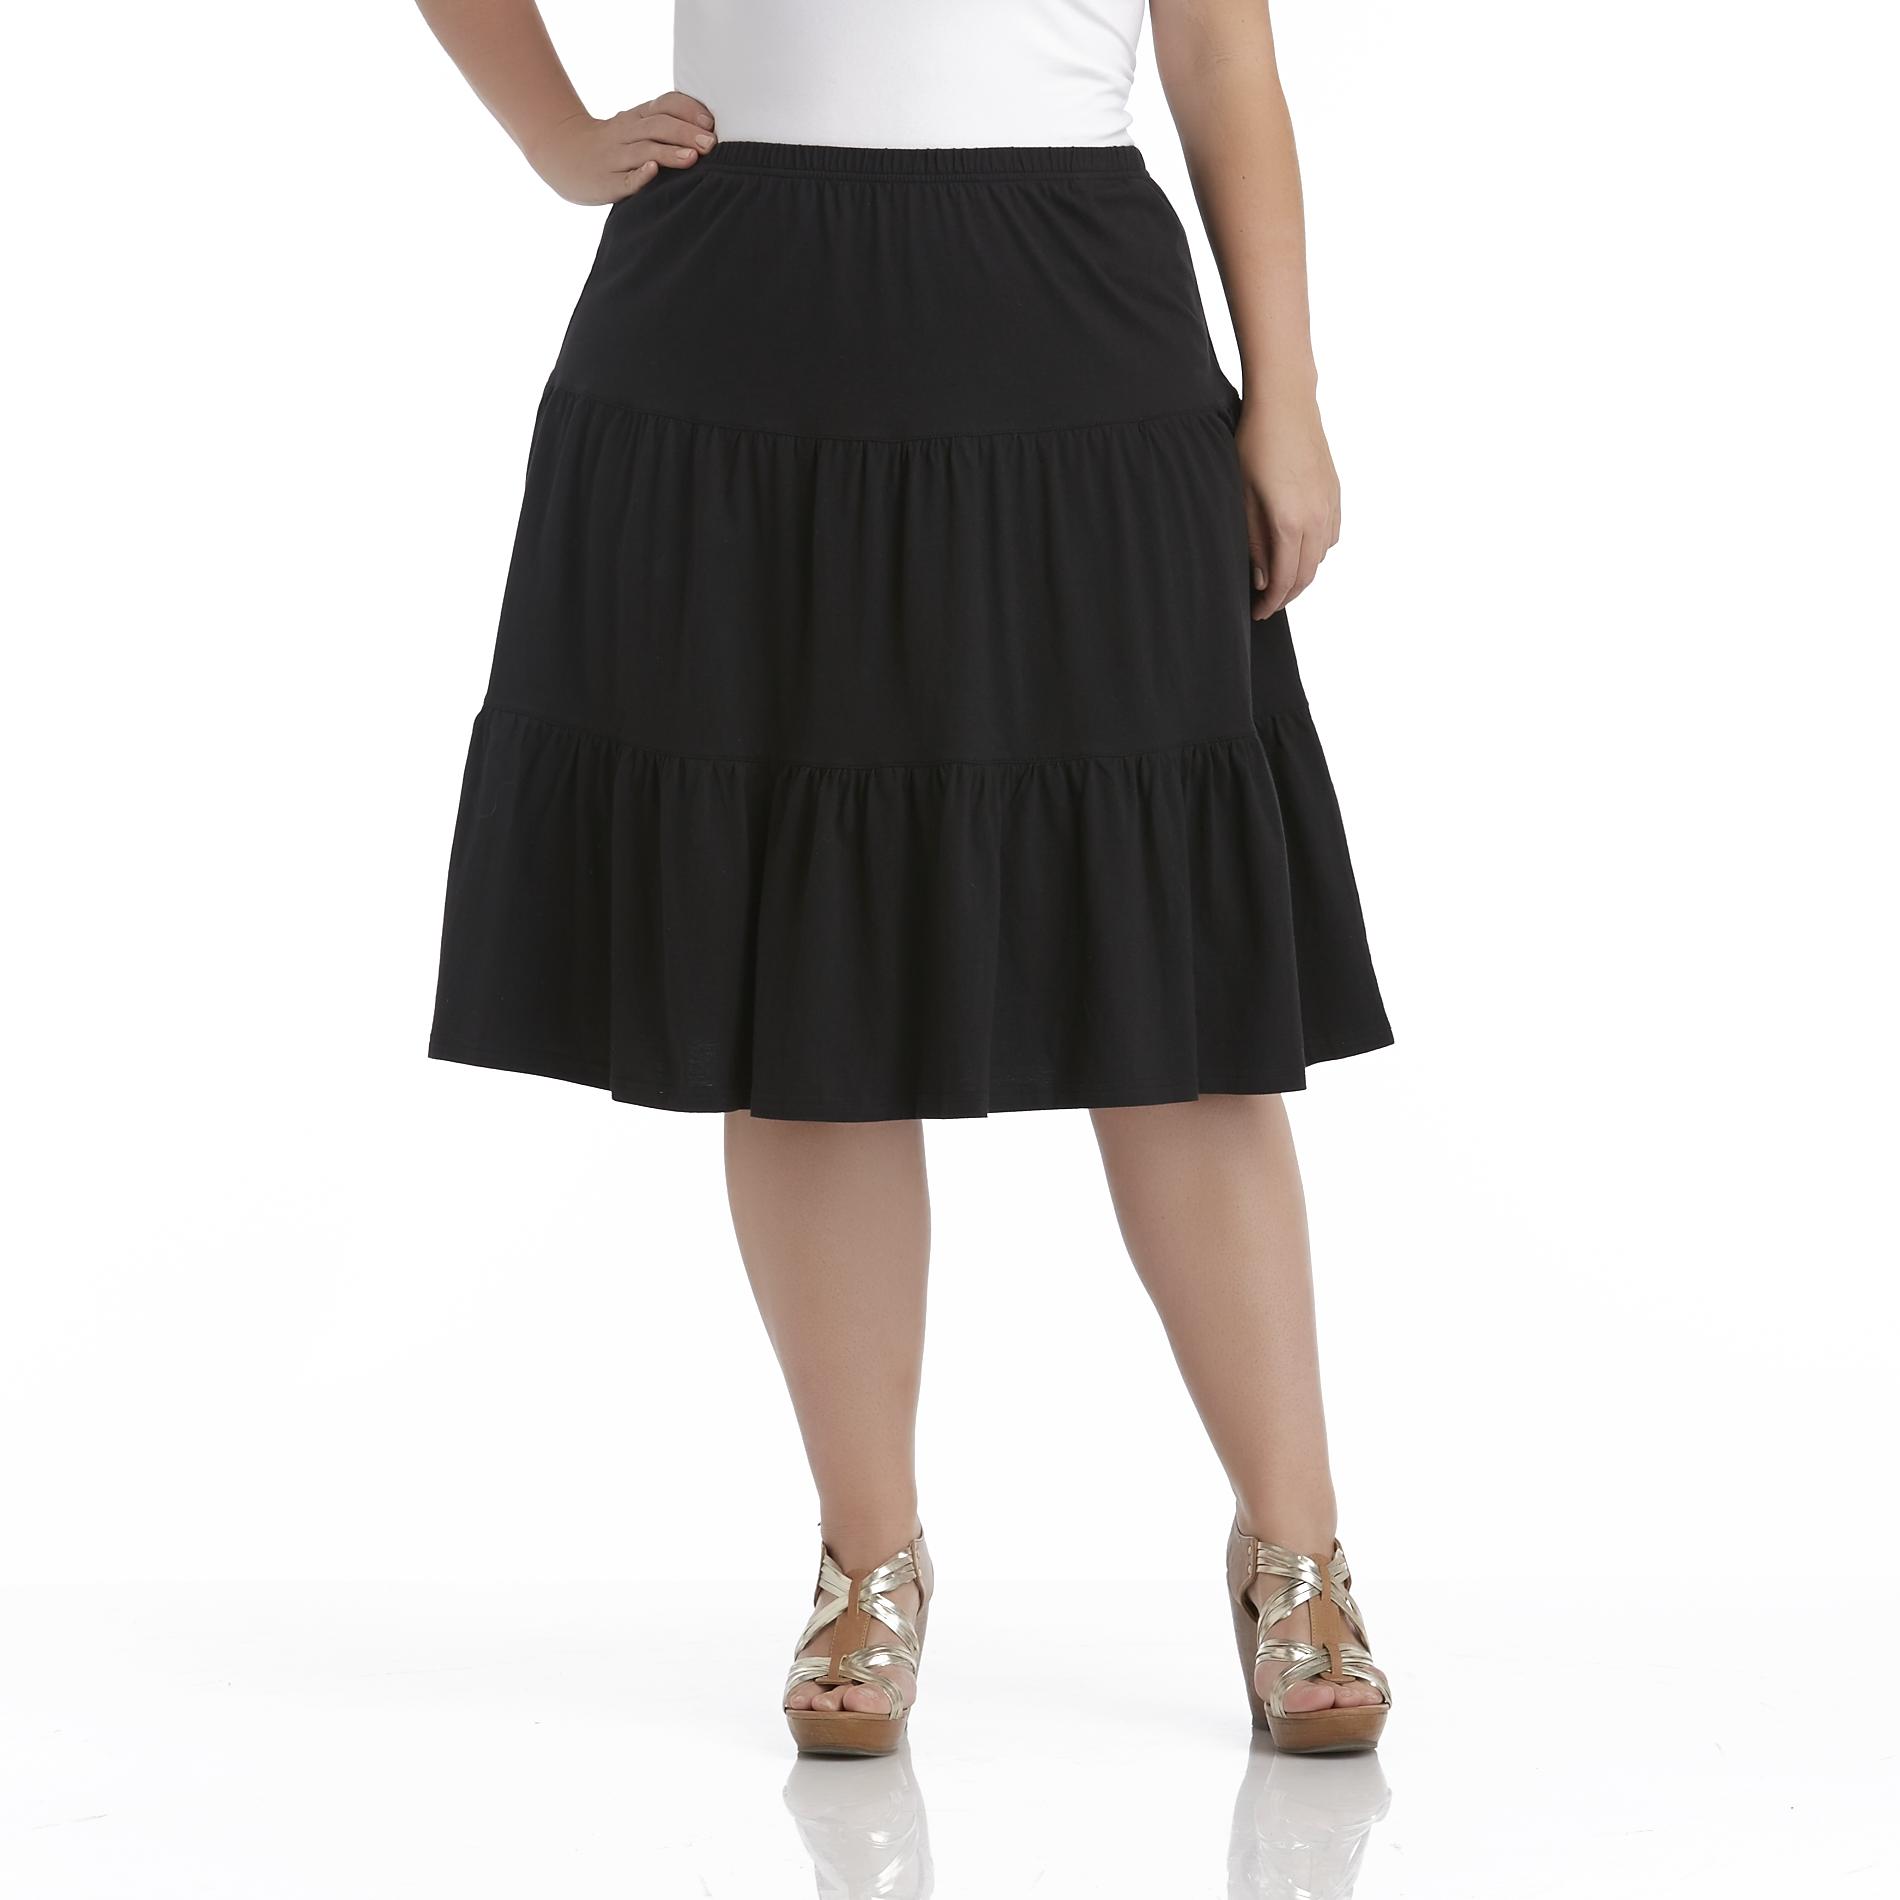 Basic Editions Women's Plus Tiered Skirt